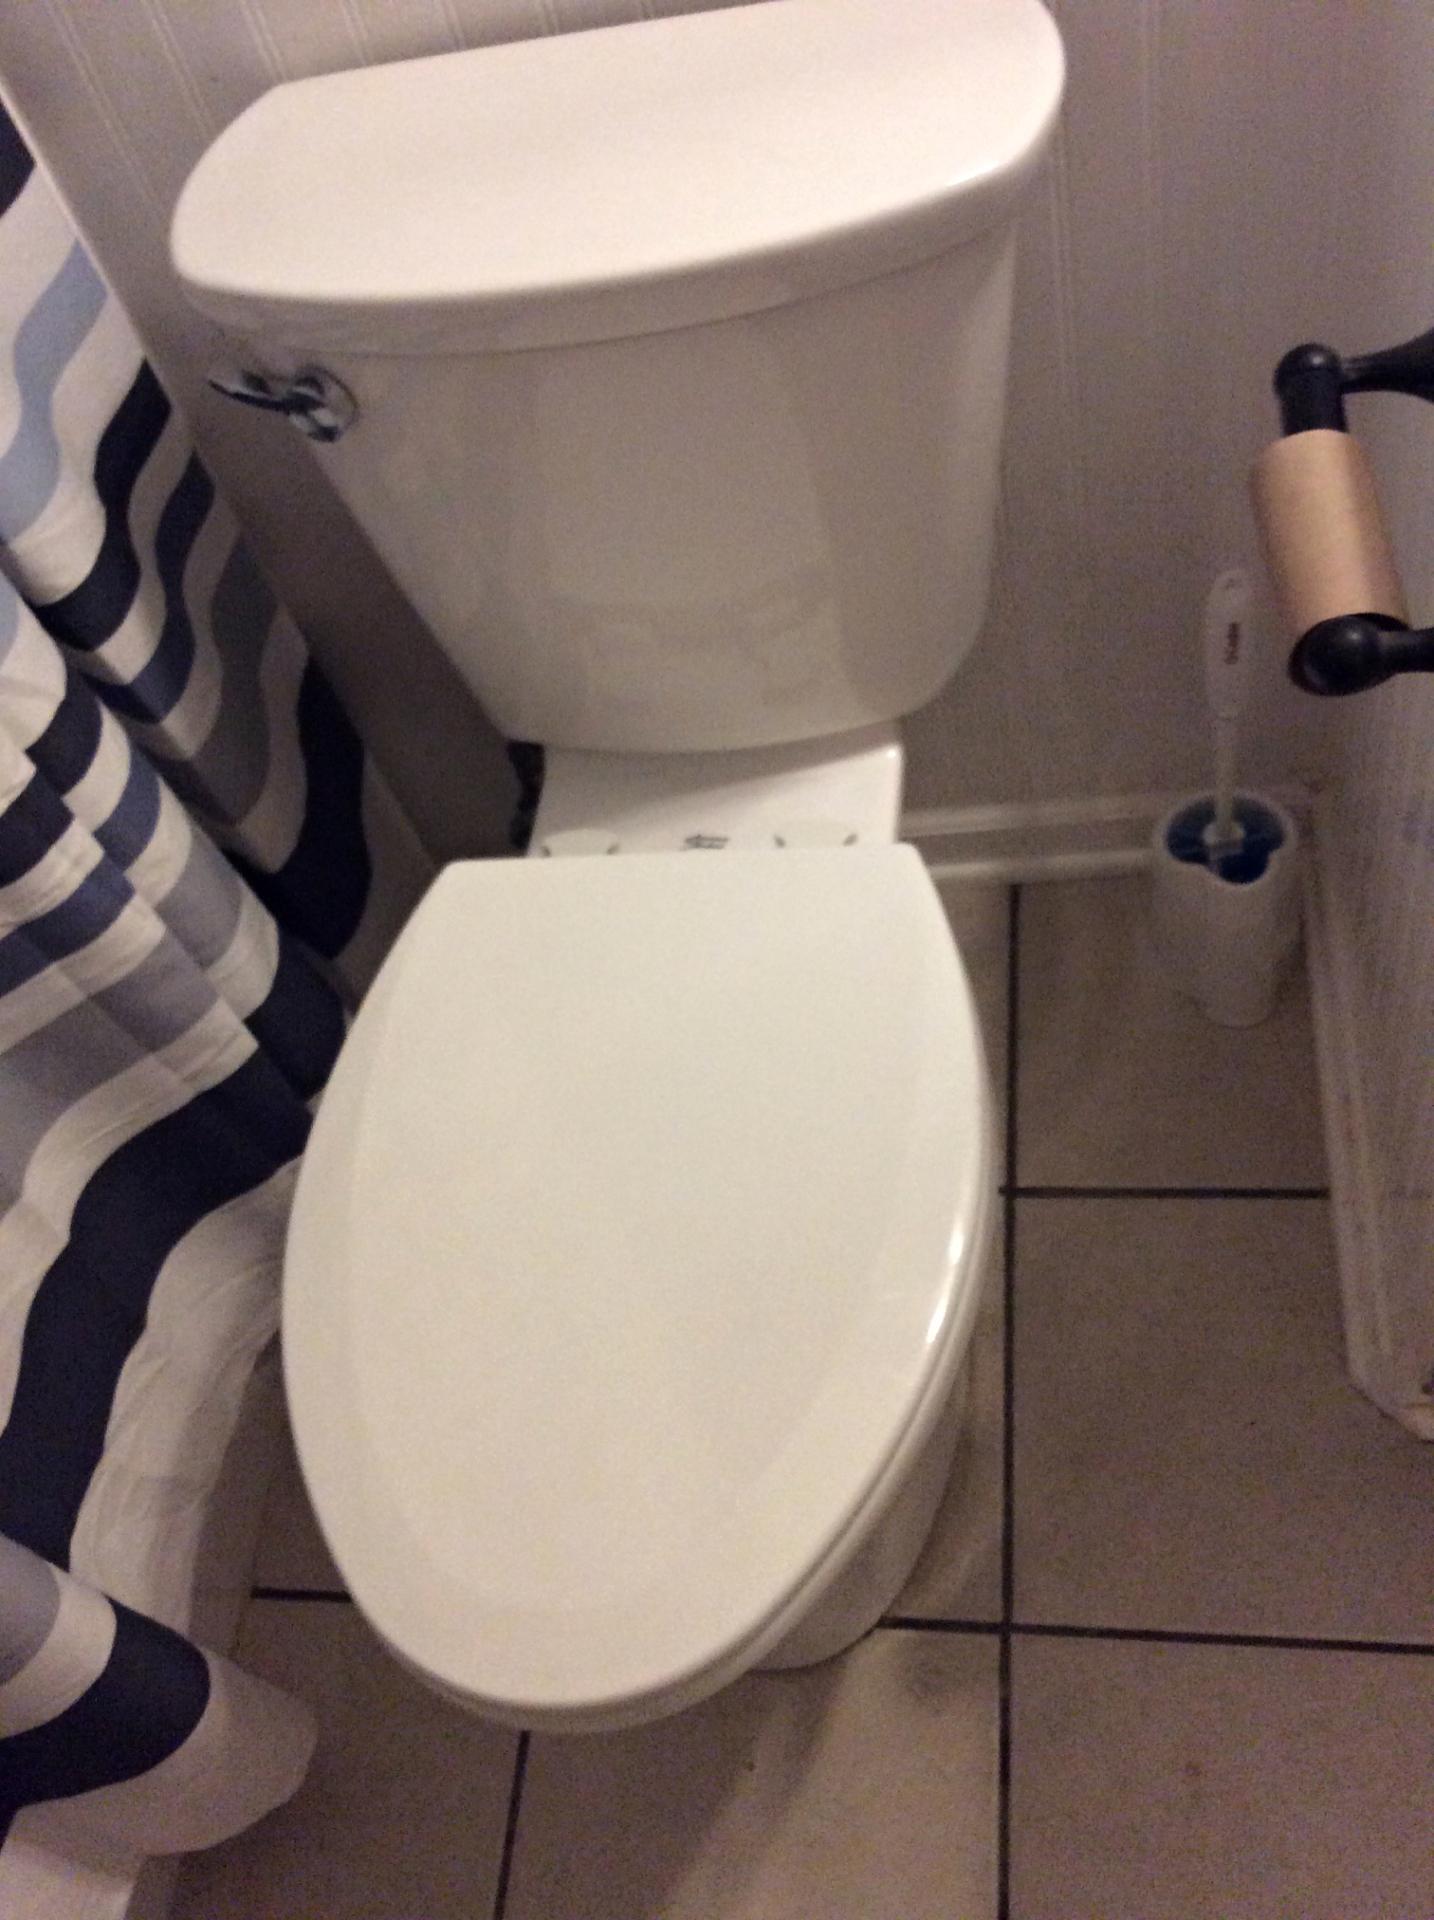 Toilet and Garbage Disposal Installed